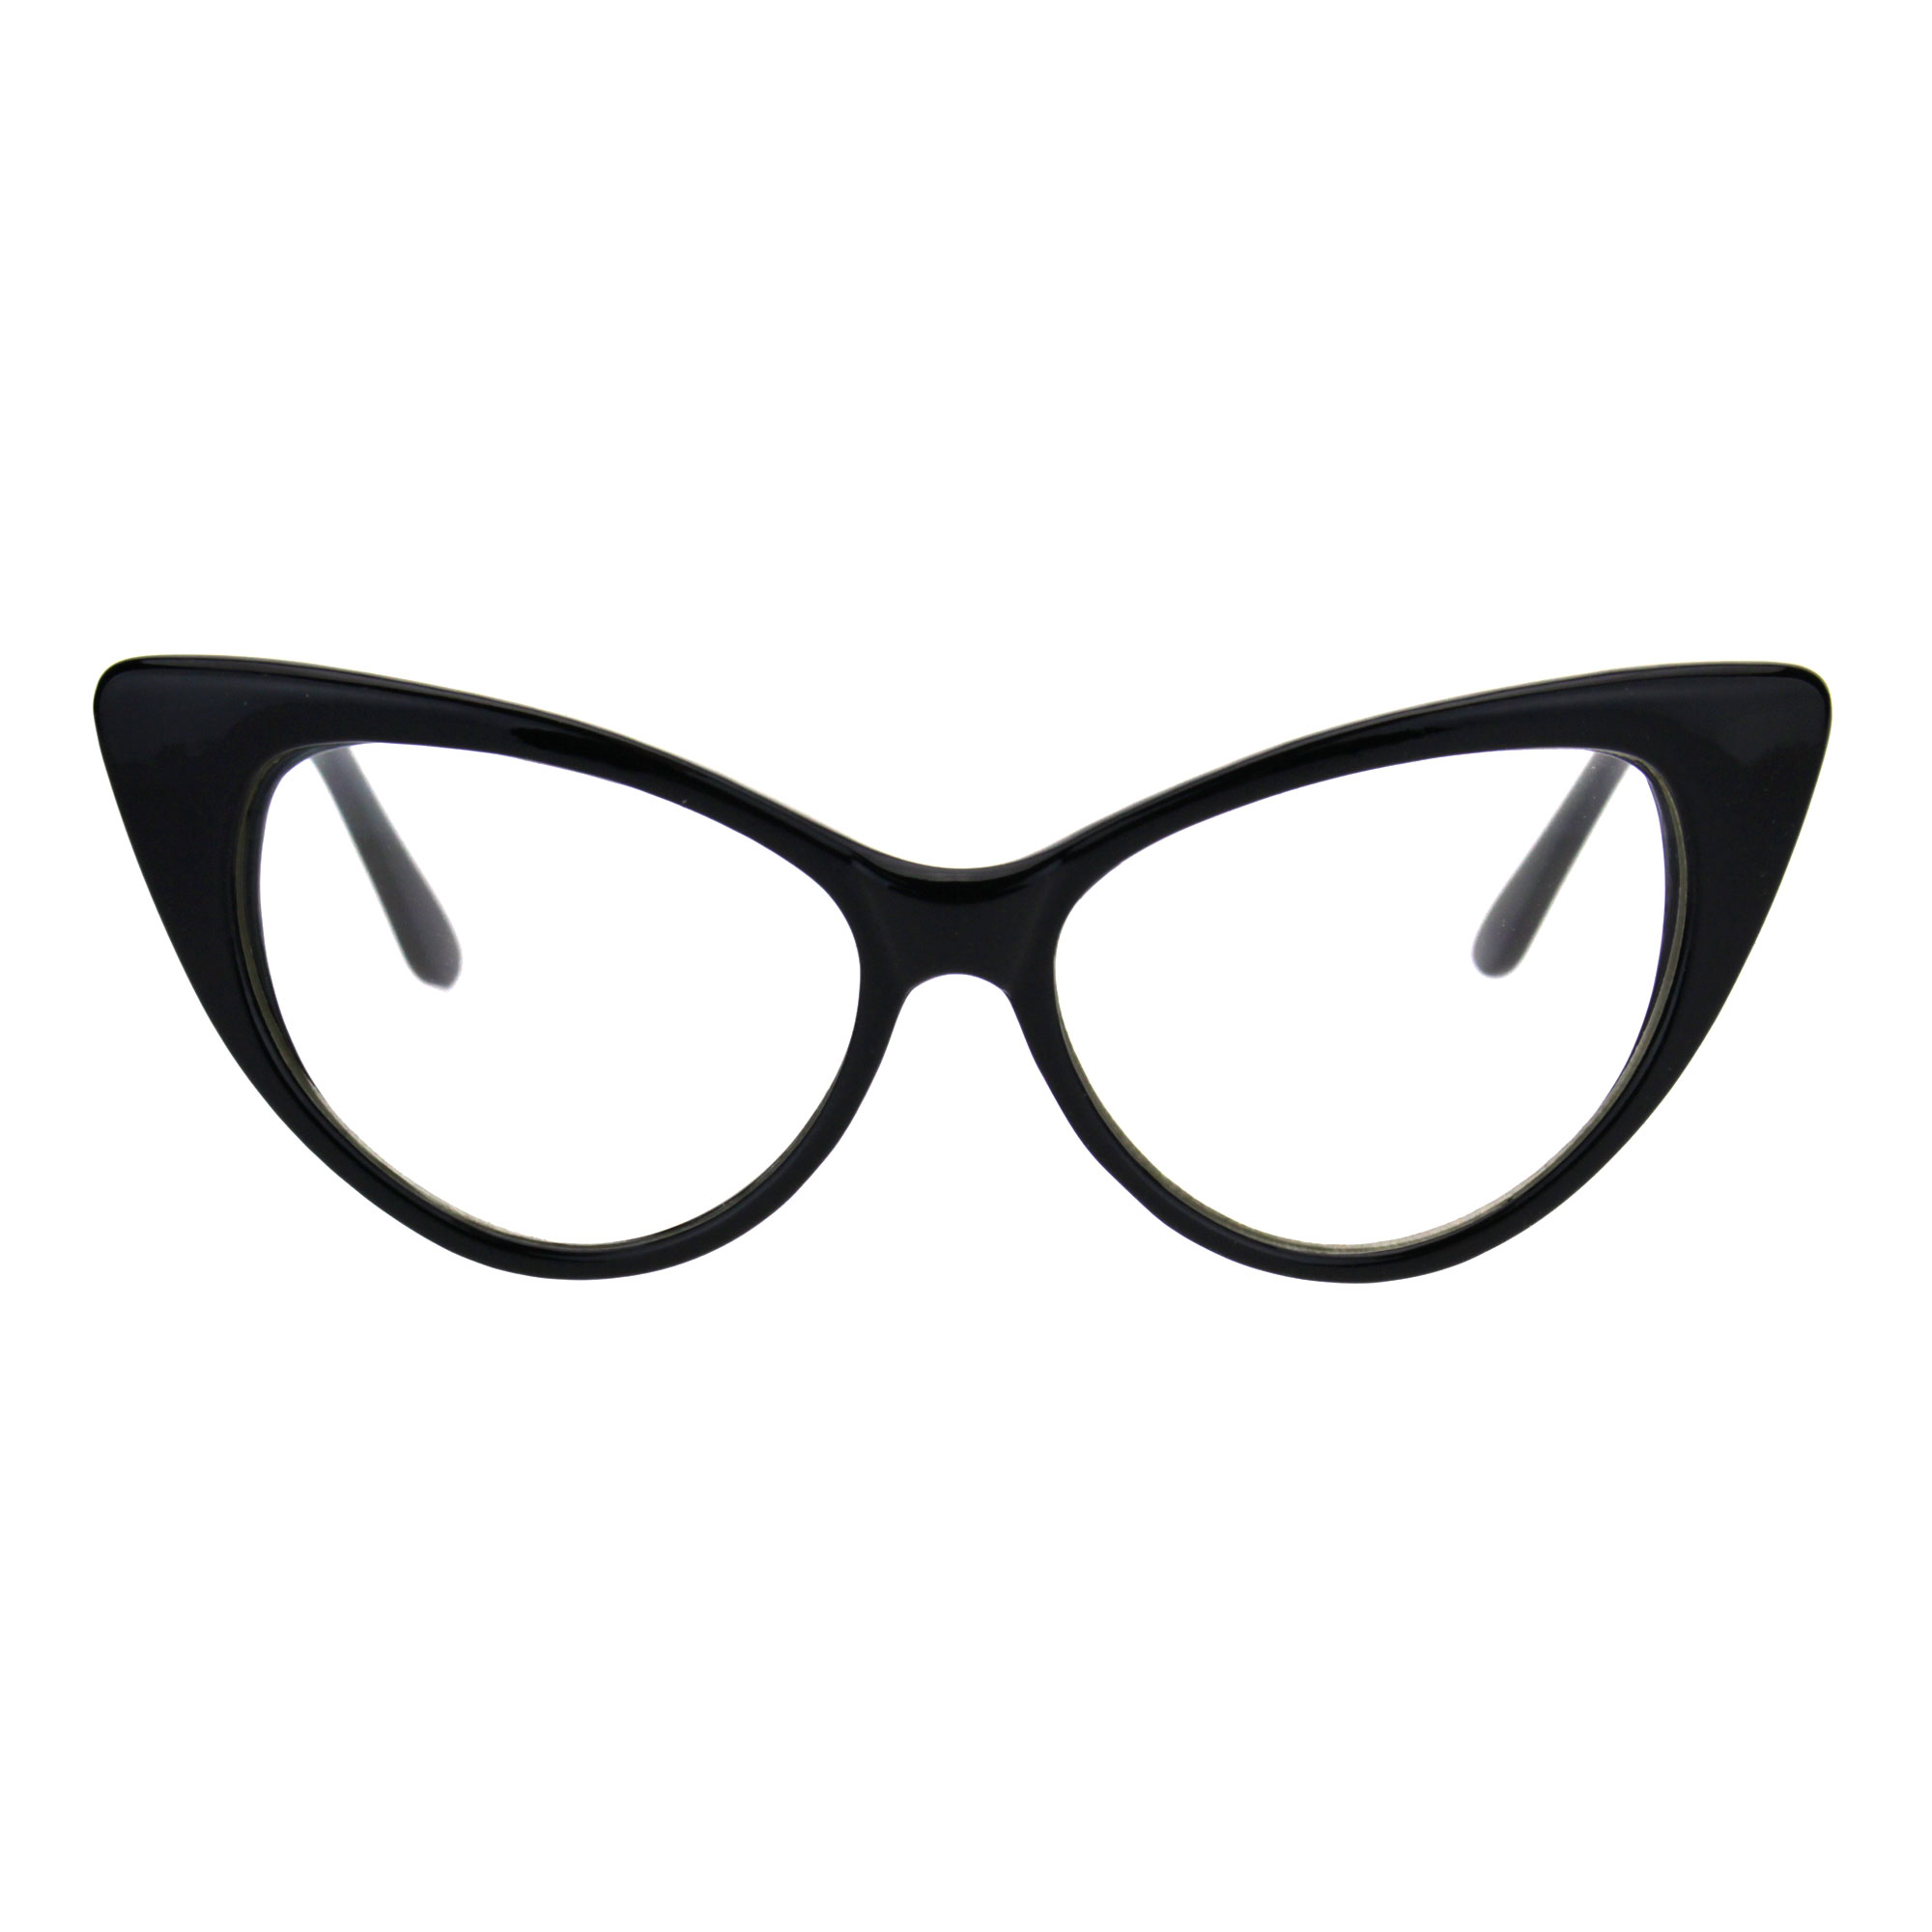 Classic Womens Gothic Clear Lens Cat Eye Glasses Black - image 1 of 3